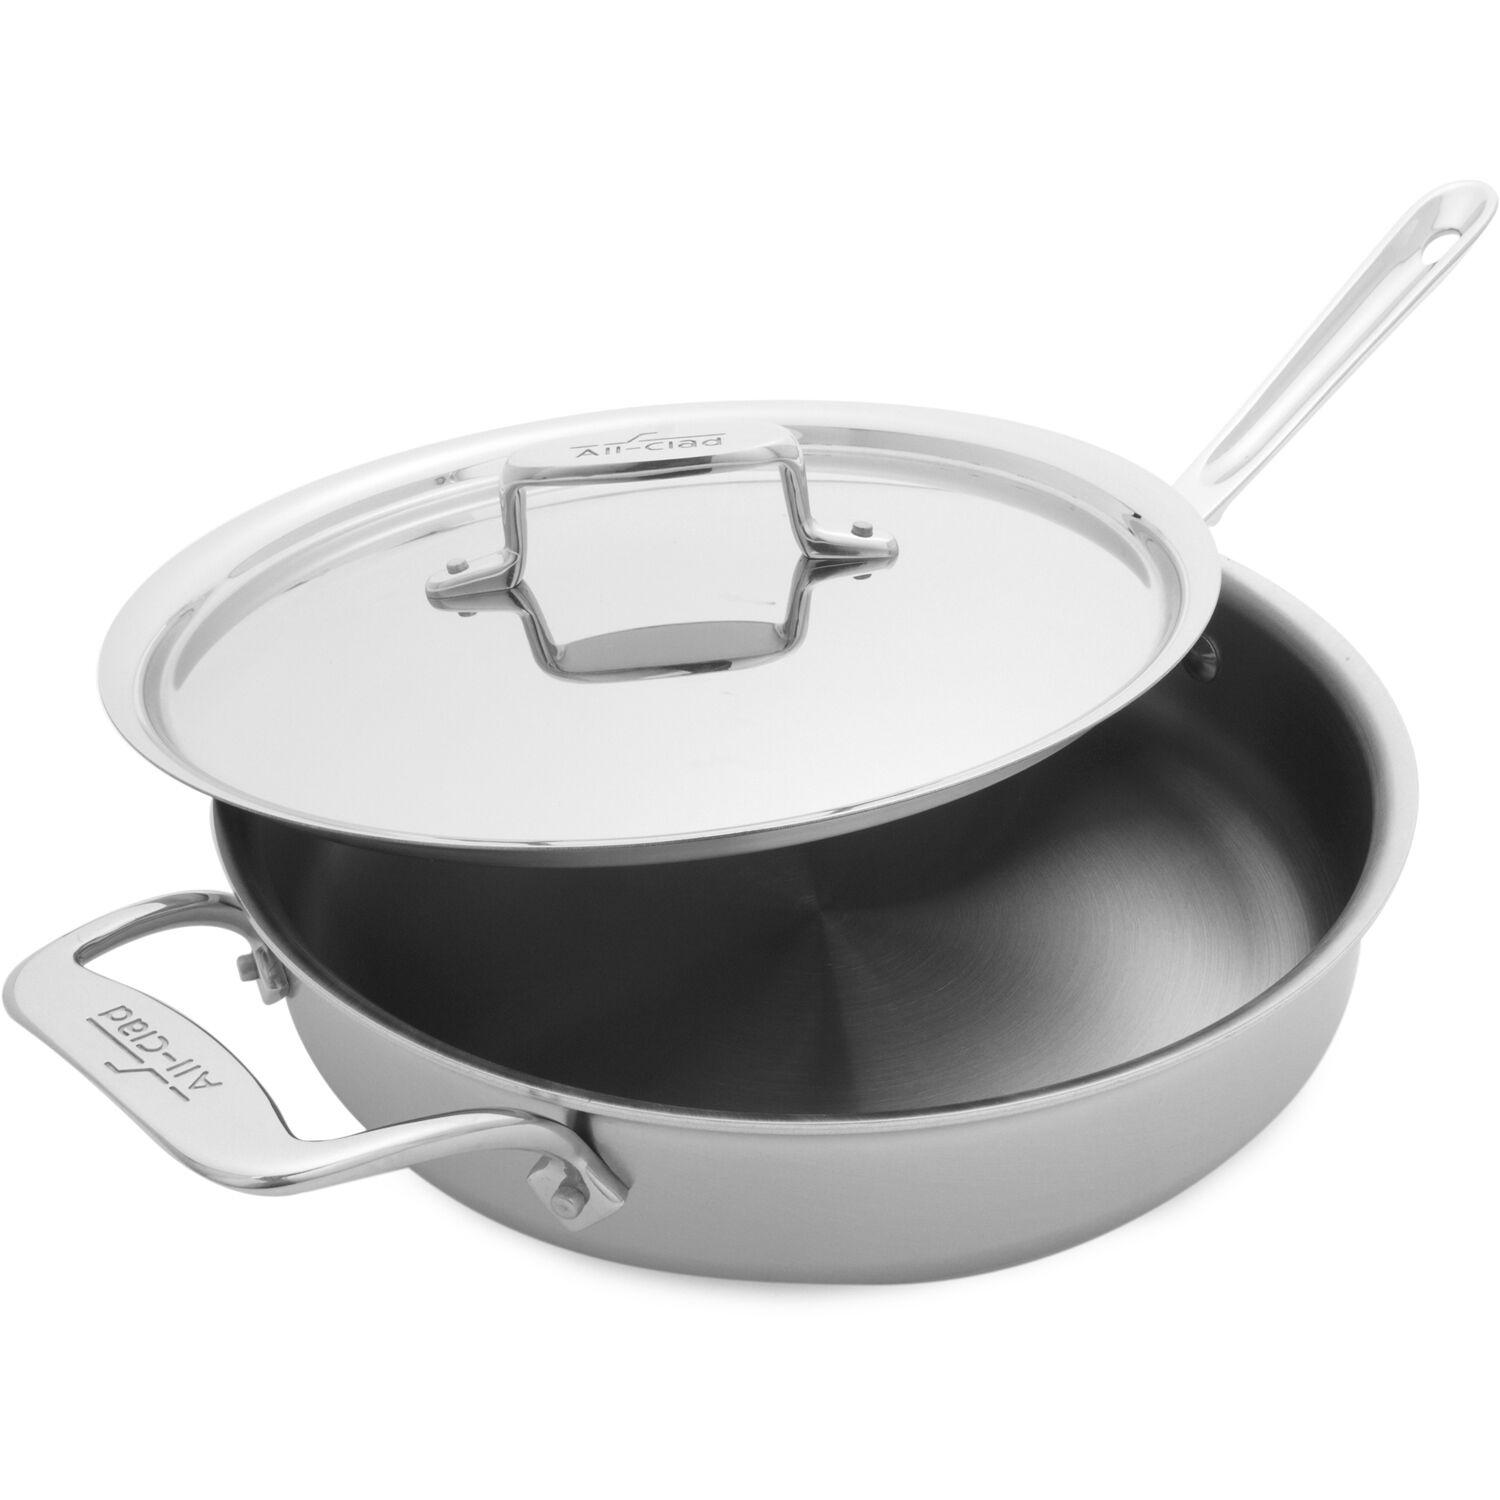 All-clad D5 Brushed Stainless Steel 4-Qt Covered Weeknight Saute Pan All Clad D5 Stainless Steel Saucepan 4 Qt